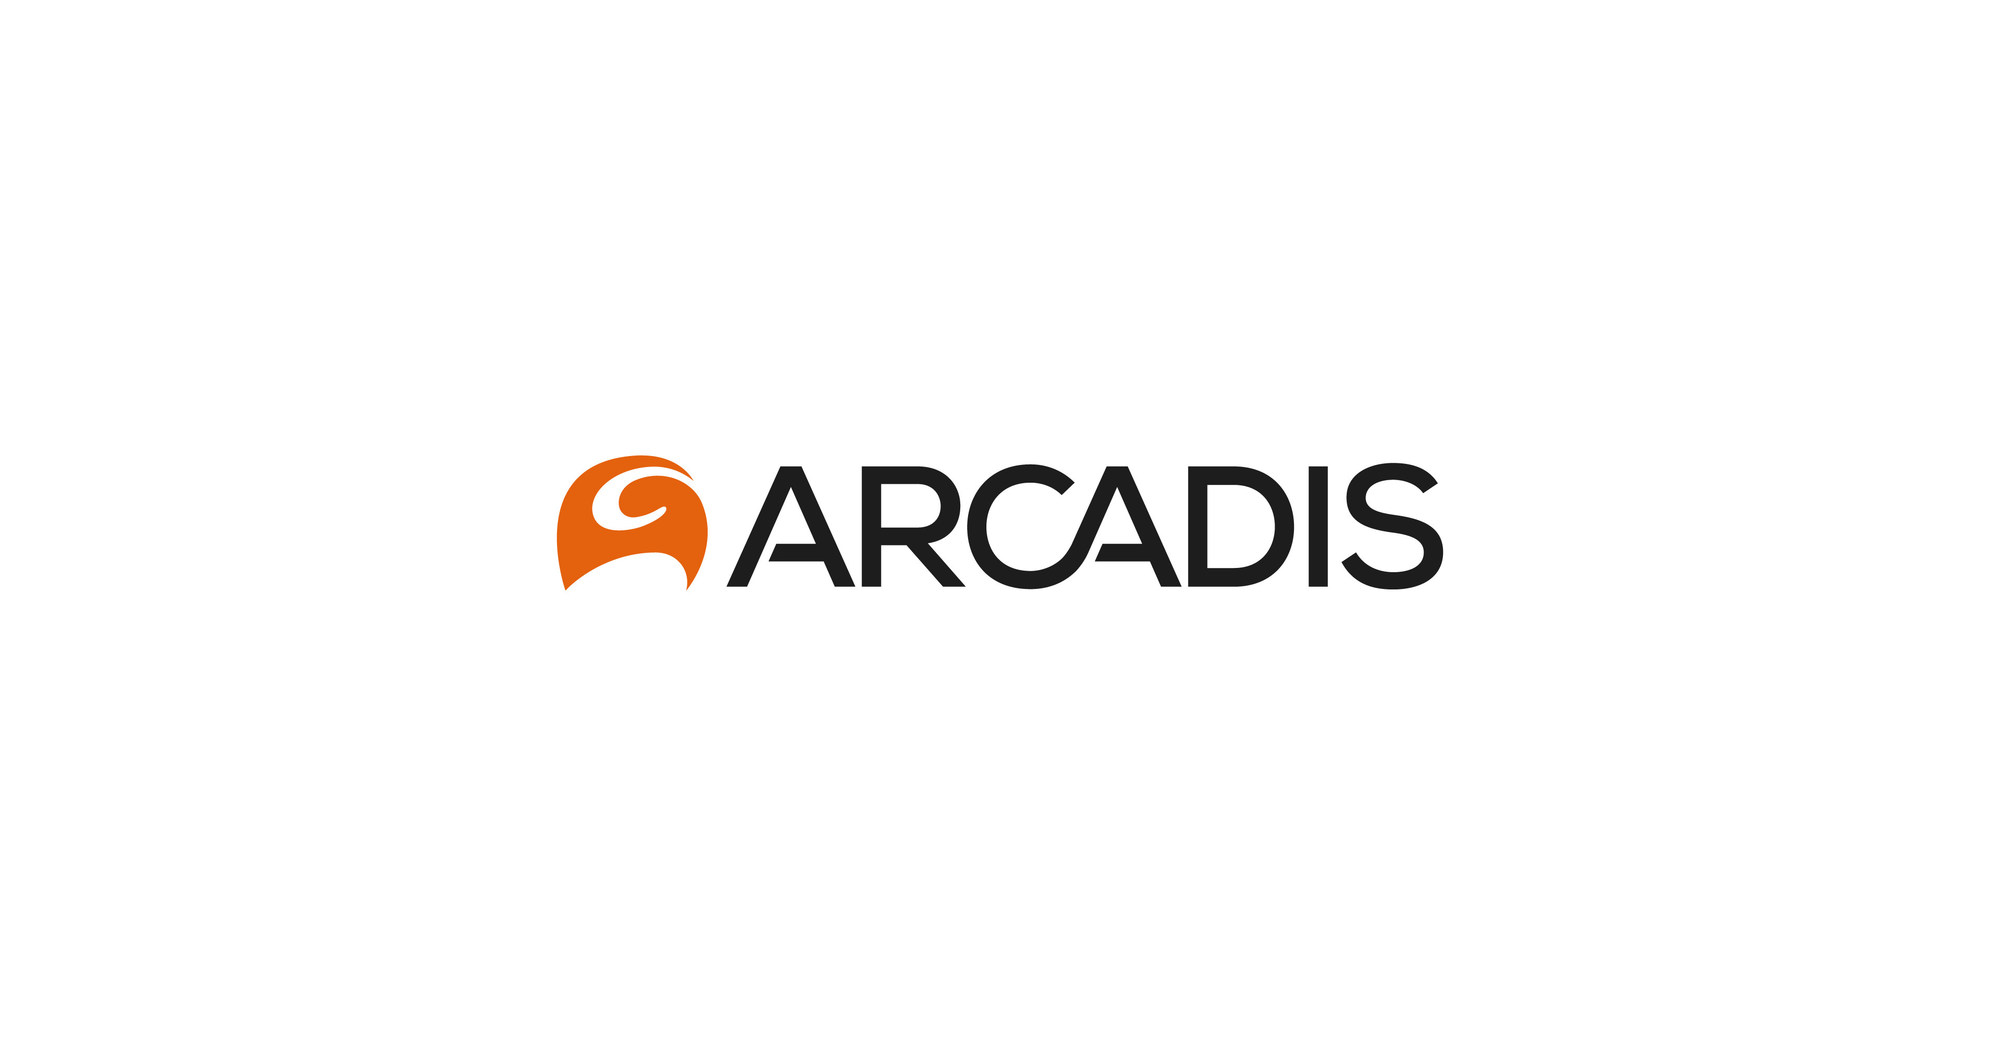 Arcadis Celebrates Opening of Regional Connector with Key Client LA Metro after 9 Years of Construction Management Support